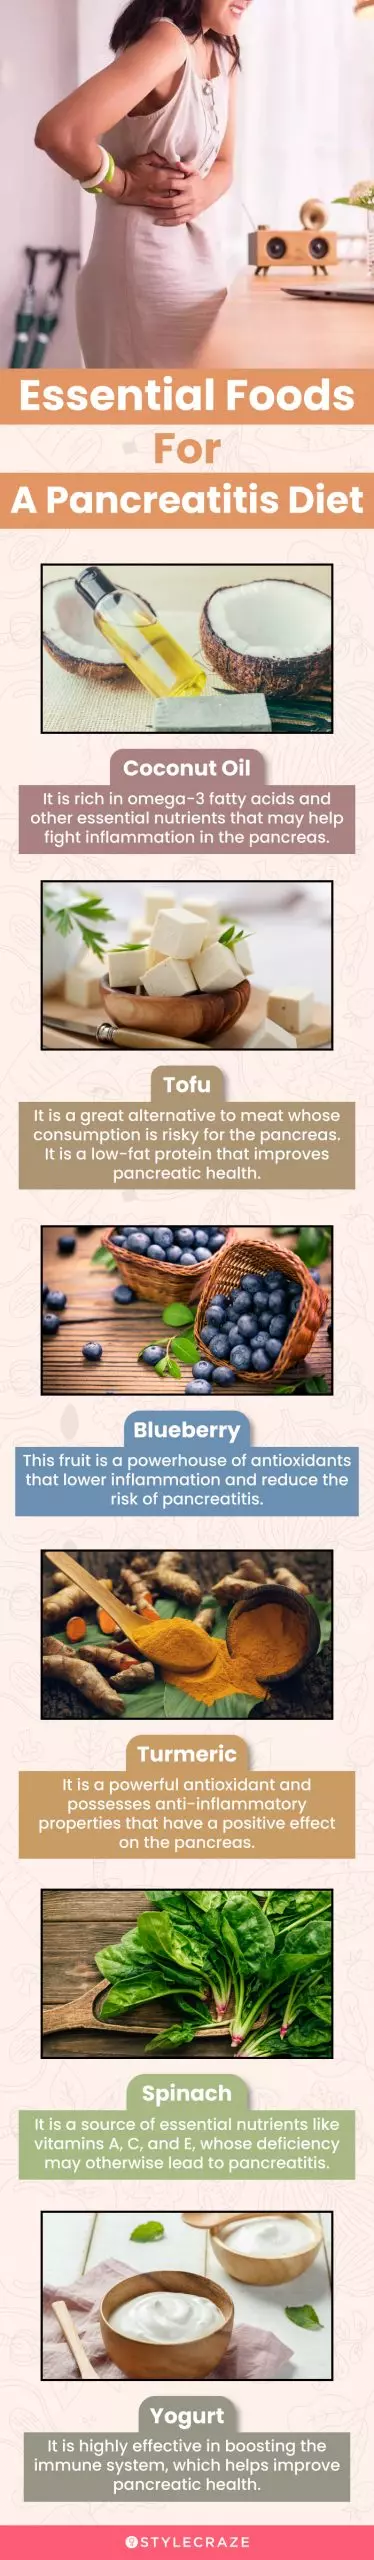 essential foods for a pancreatitis diet (infographic)